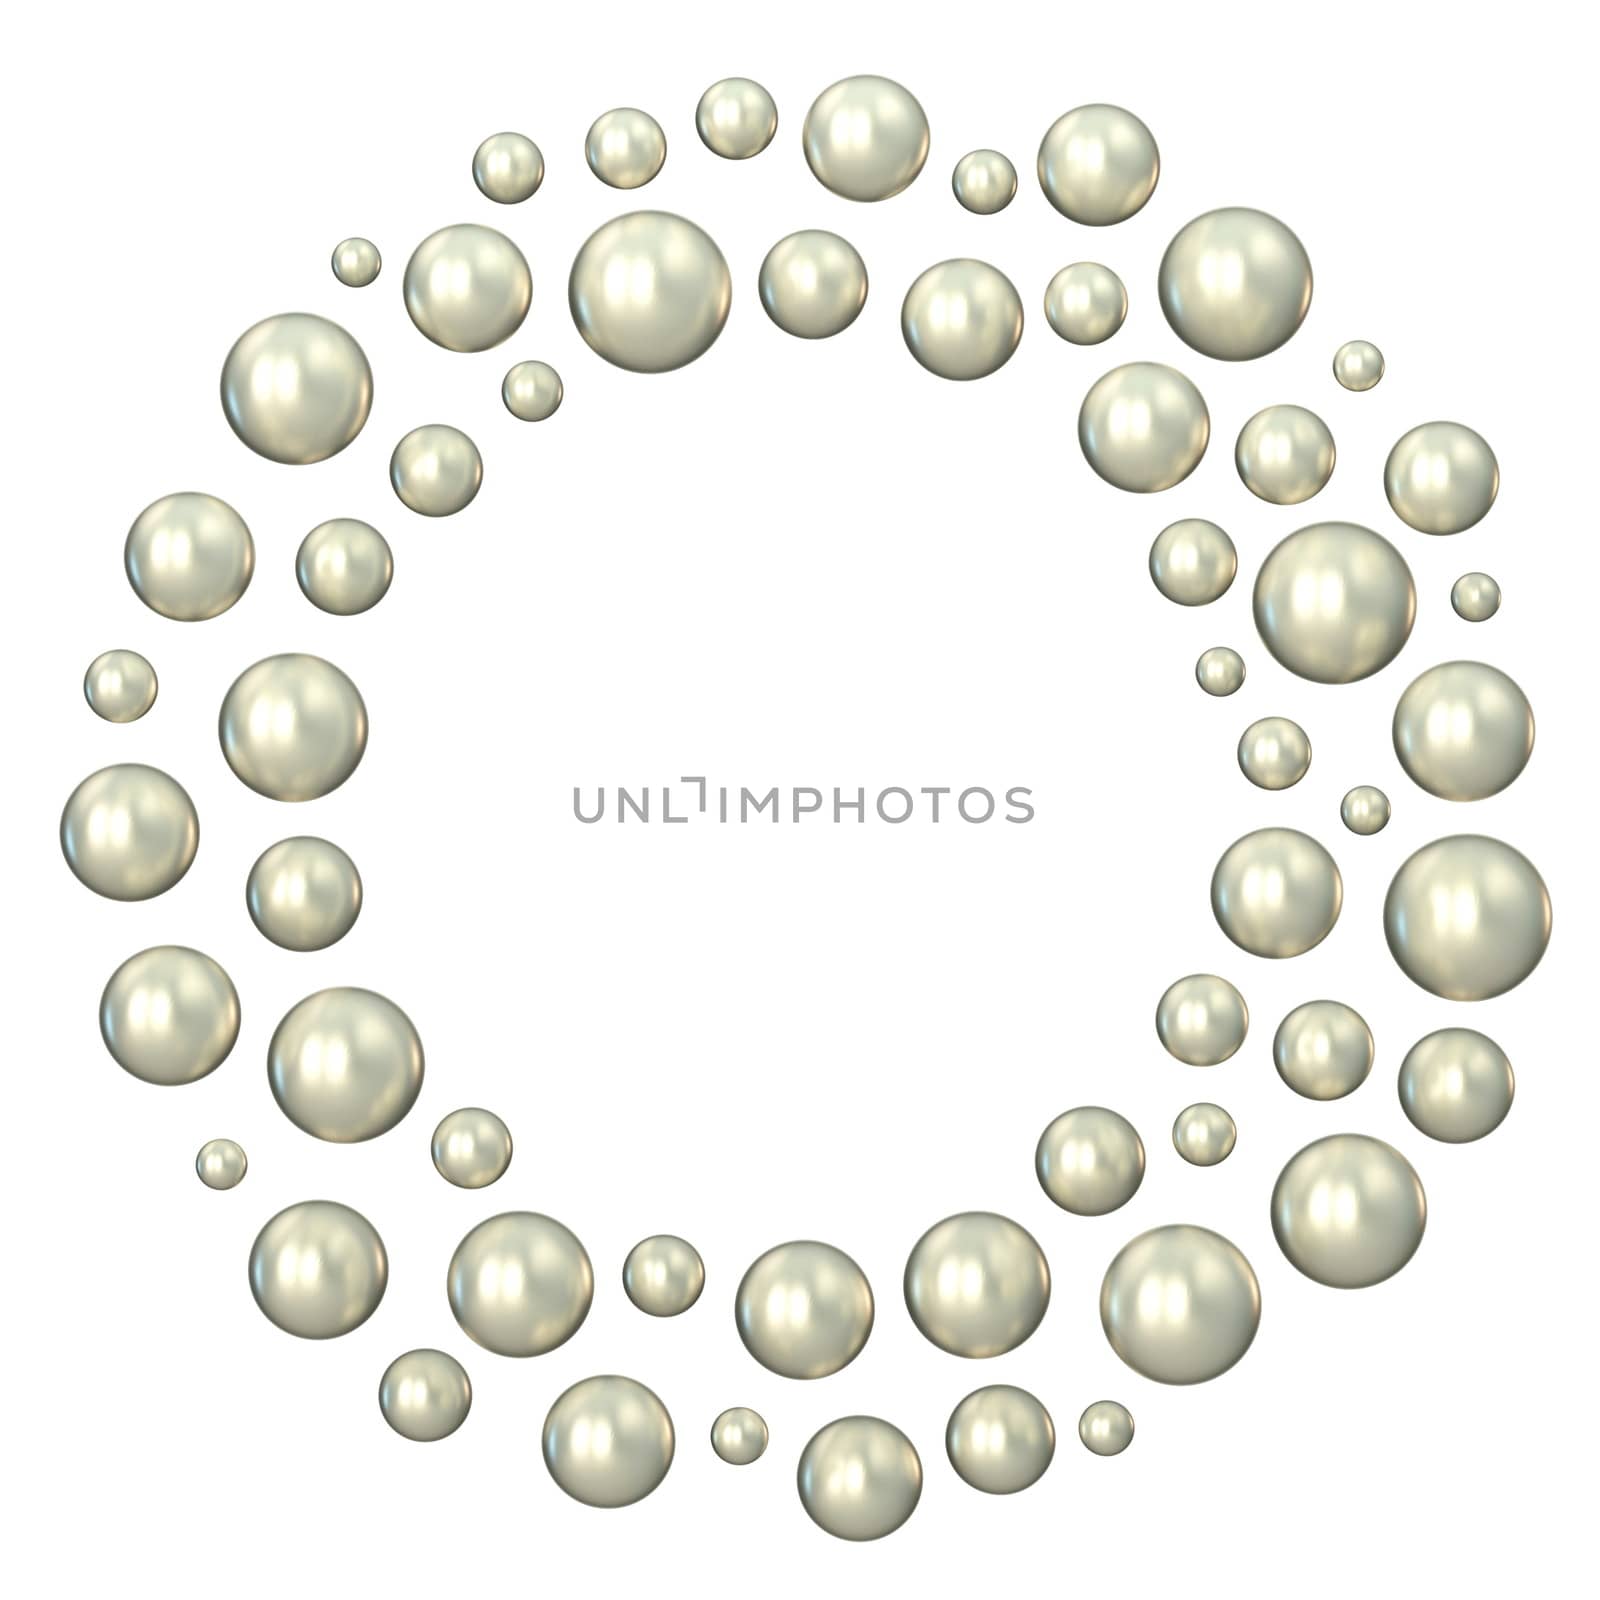 Circle made of scattered pearls 3D rendering illustration isolated on white background